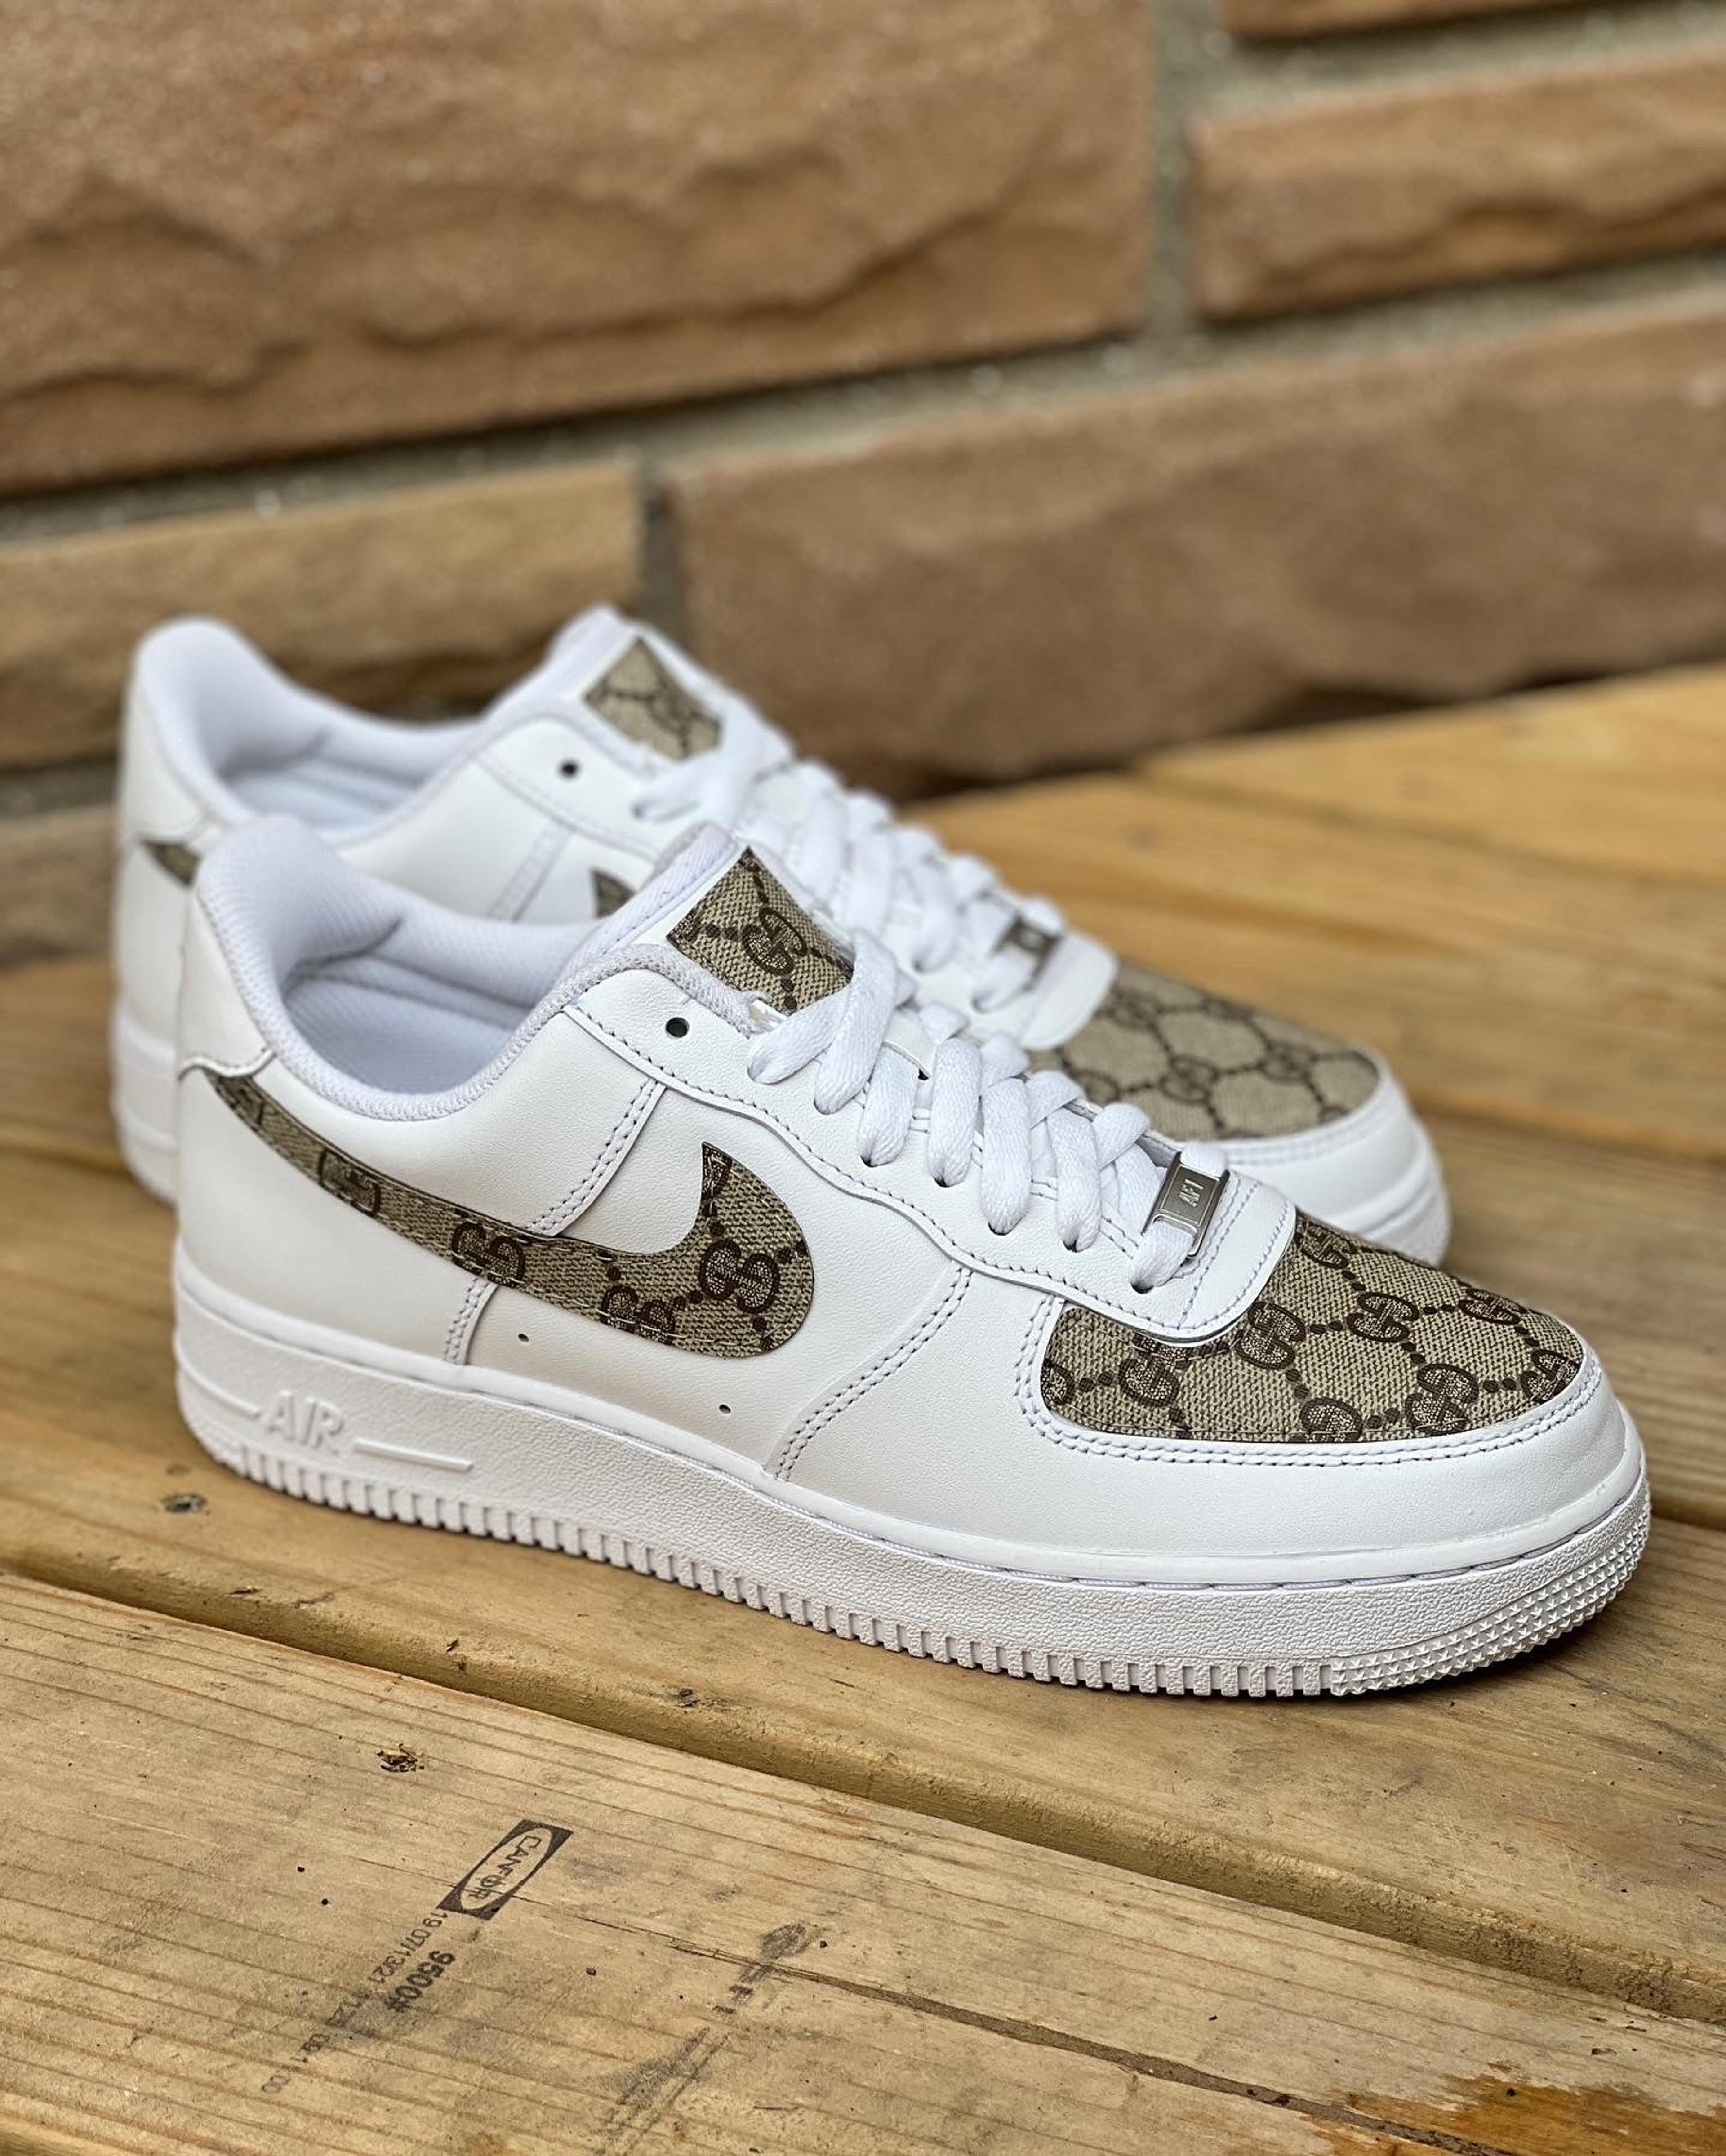 Kamer Verfrissend ding NTWRK - Custom Gucci x White Air Force 1 Lows - With Toe Box